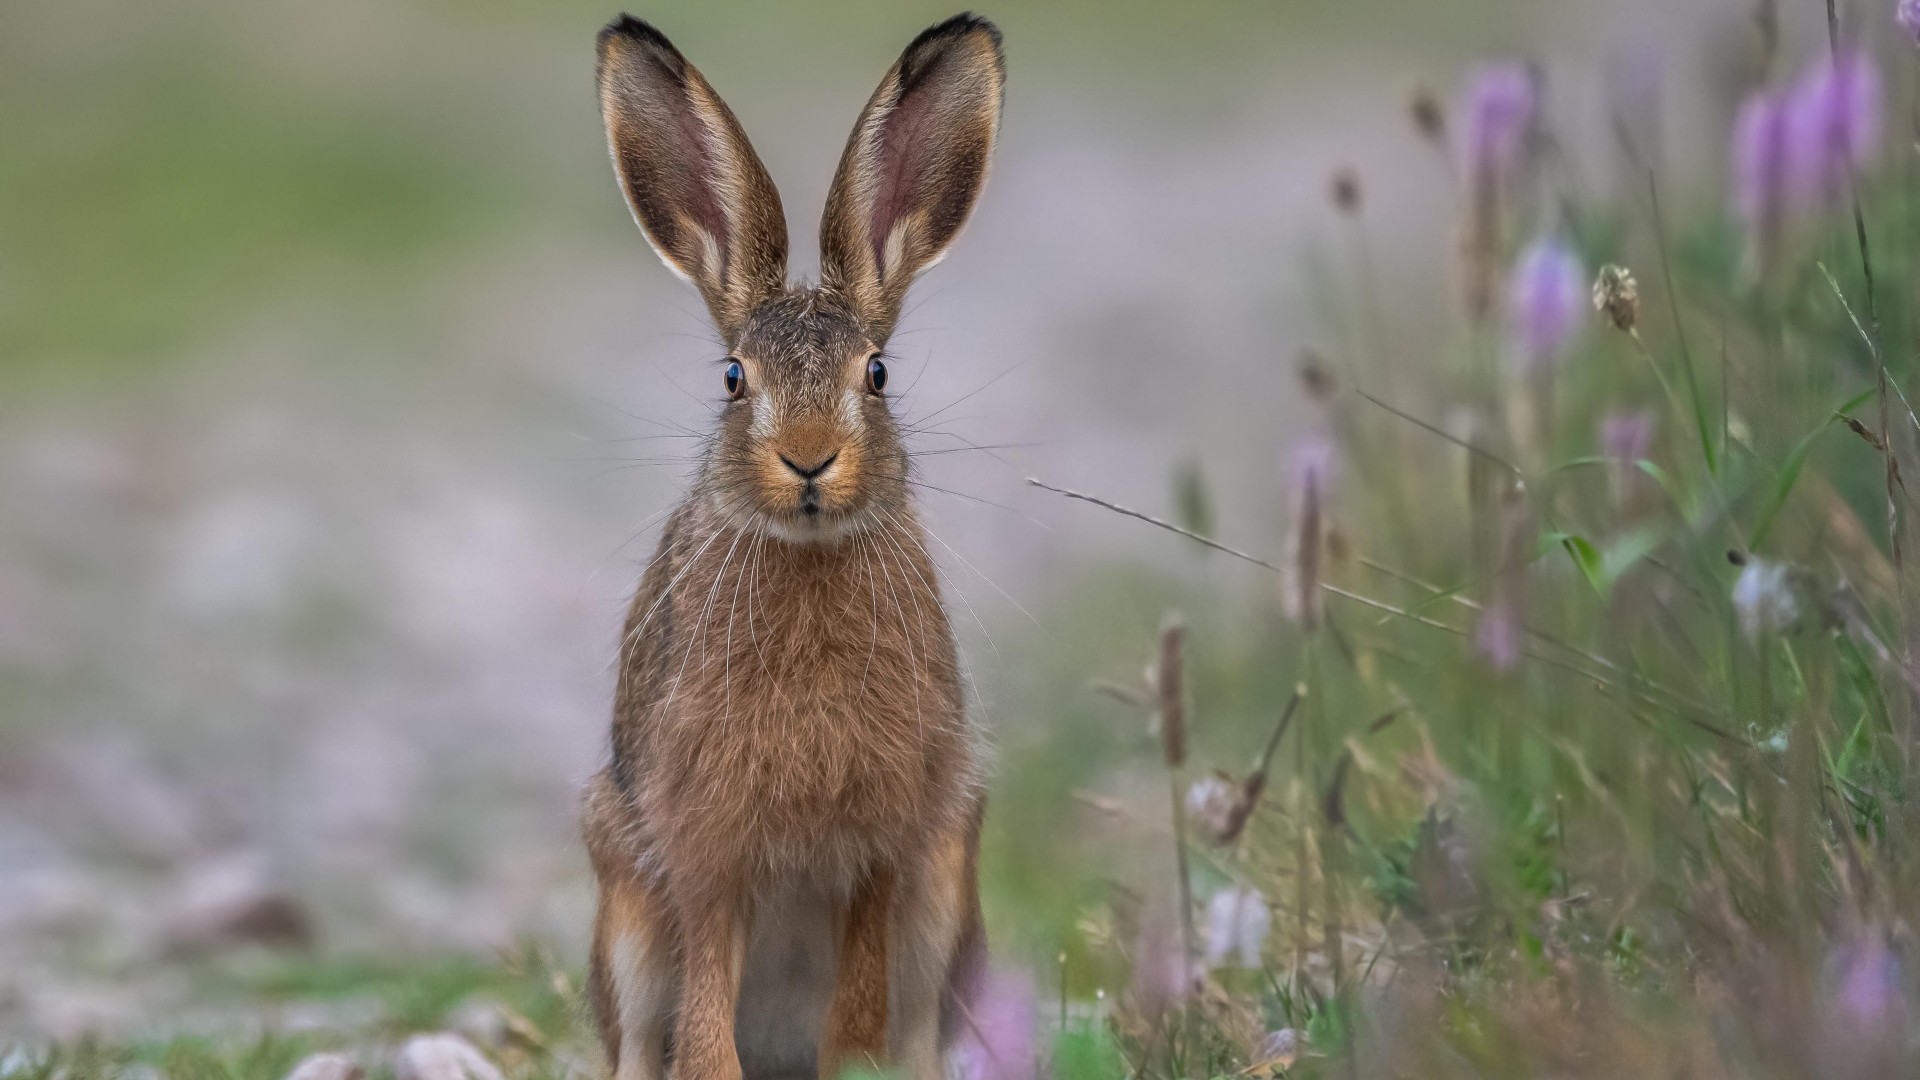 A hare sitting in a meadow of long grass and wild flowers